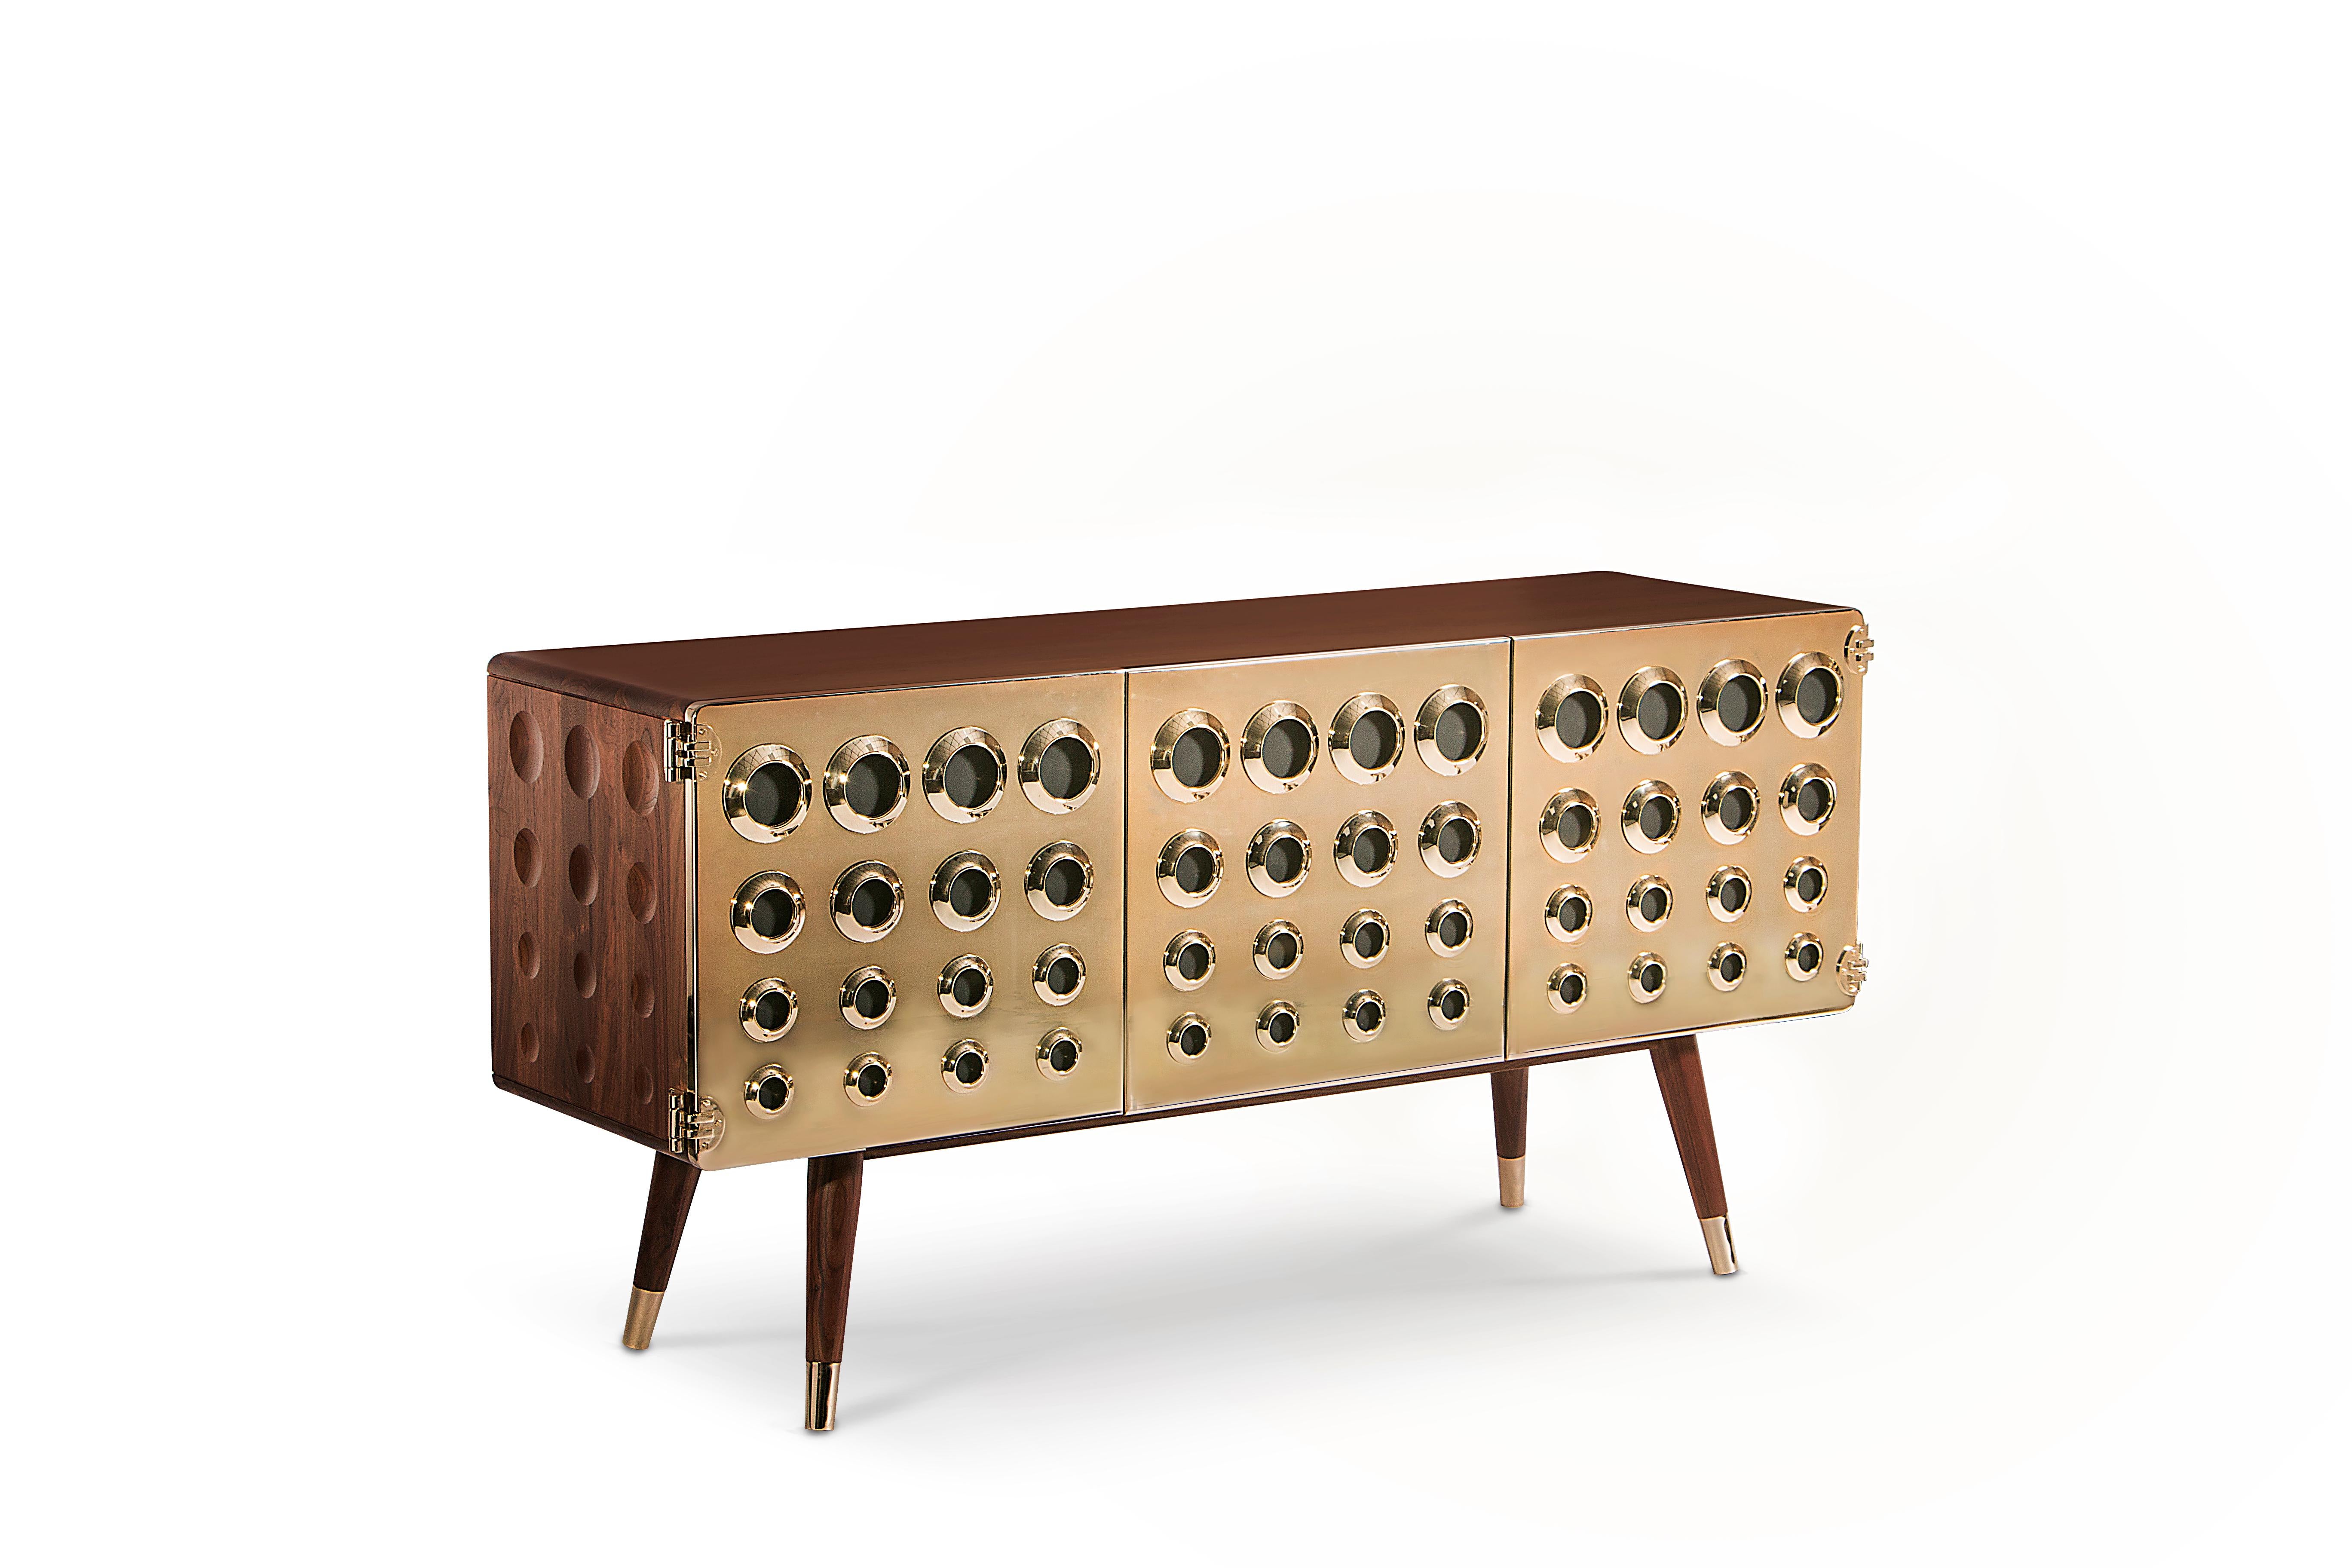 If you are a fan of James Bond's world, you will certainly be dazzled with this golden eye‐catching piece. Our Monocles sideboard is made in solid walnut wood and brass with knurled details. Circles are engraved on the sides and the back in the